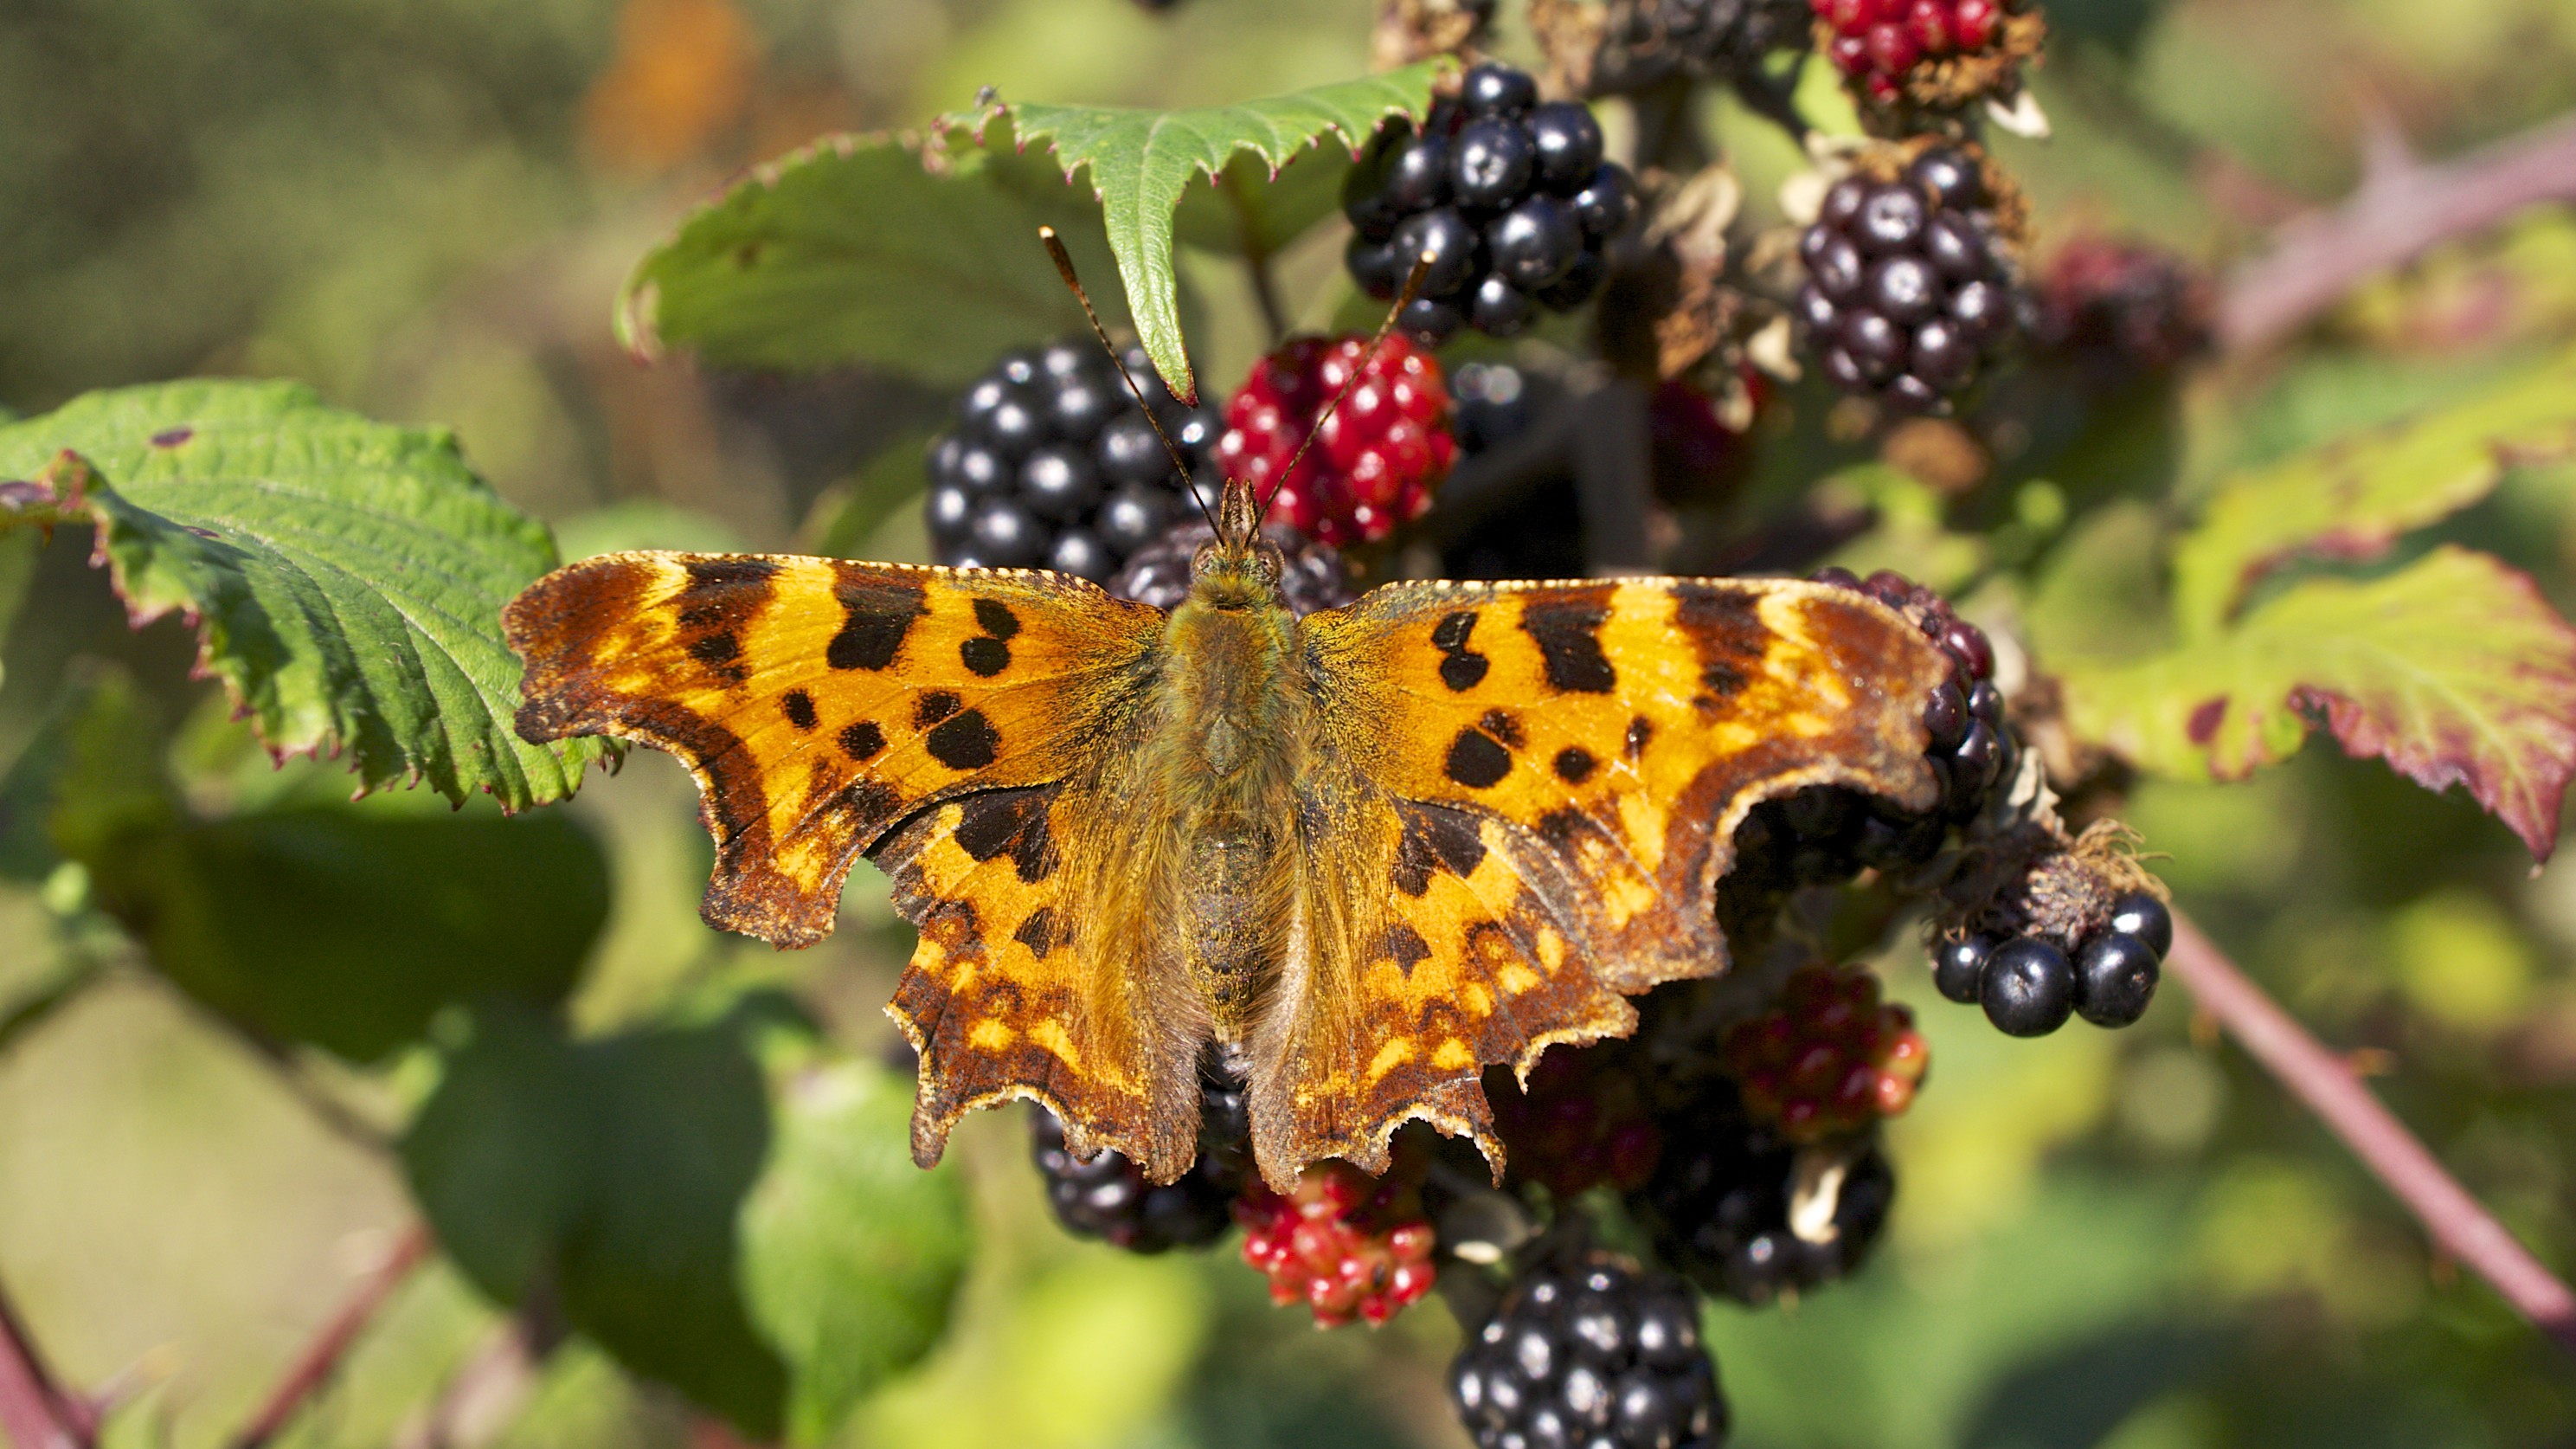 Comma butterfly sits on a bunch of summer berries. Orange wings with black marks and the angular/scalloped rear edges of both pairs of wings that give these animals the name “anglewings.”